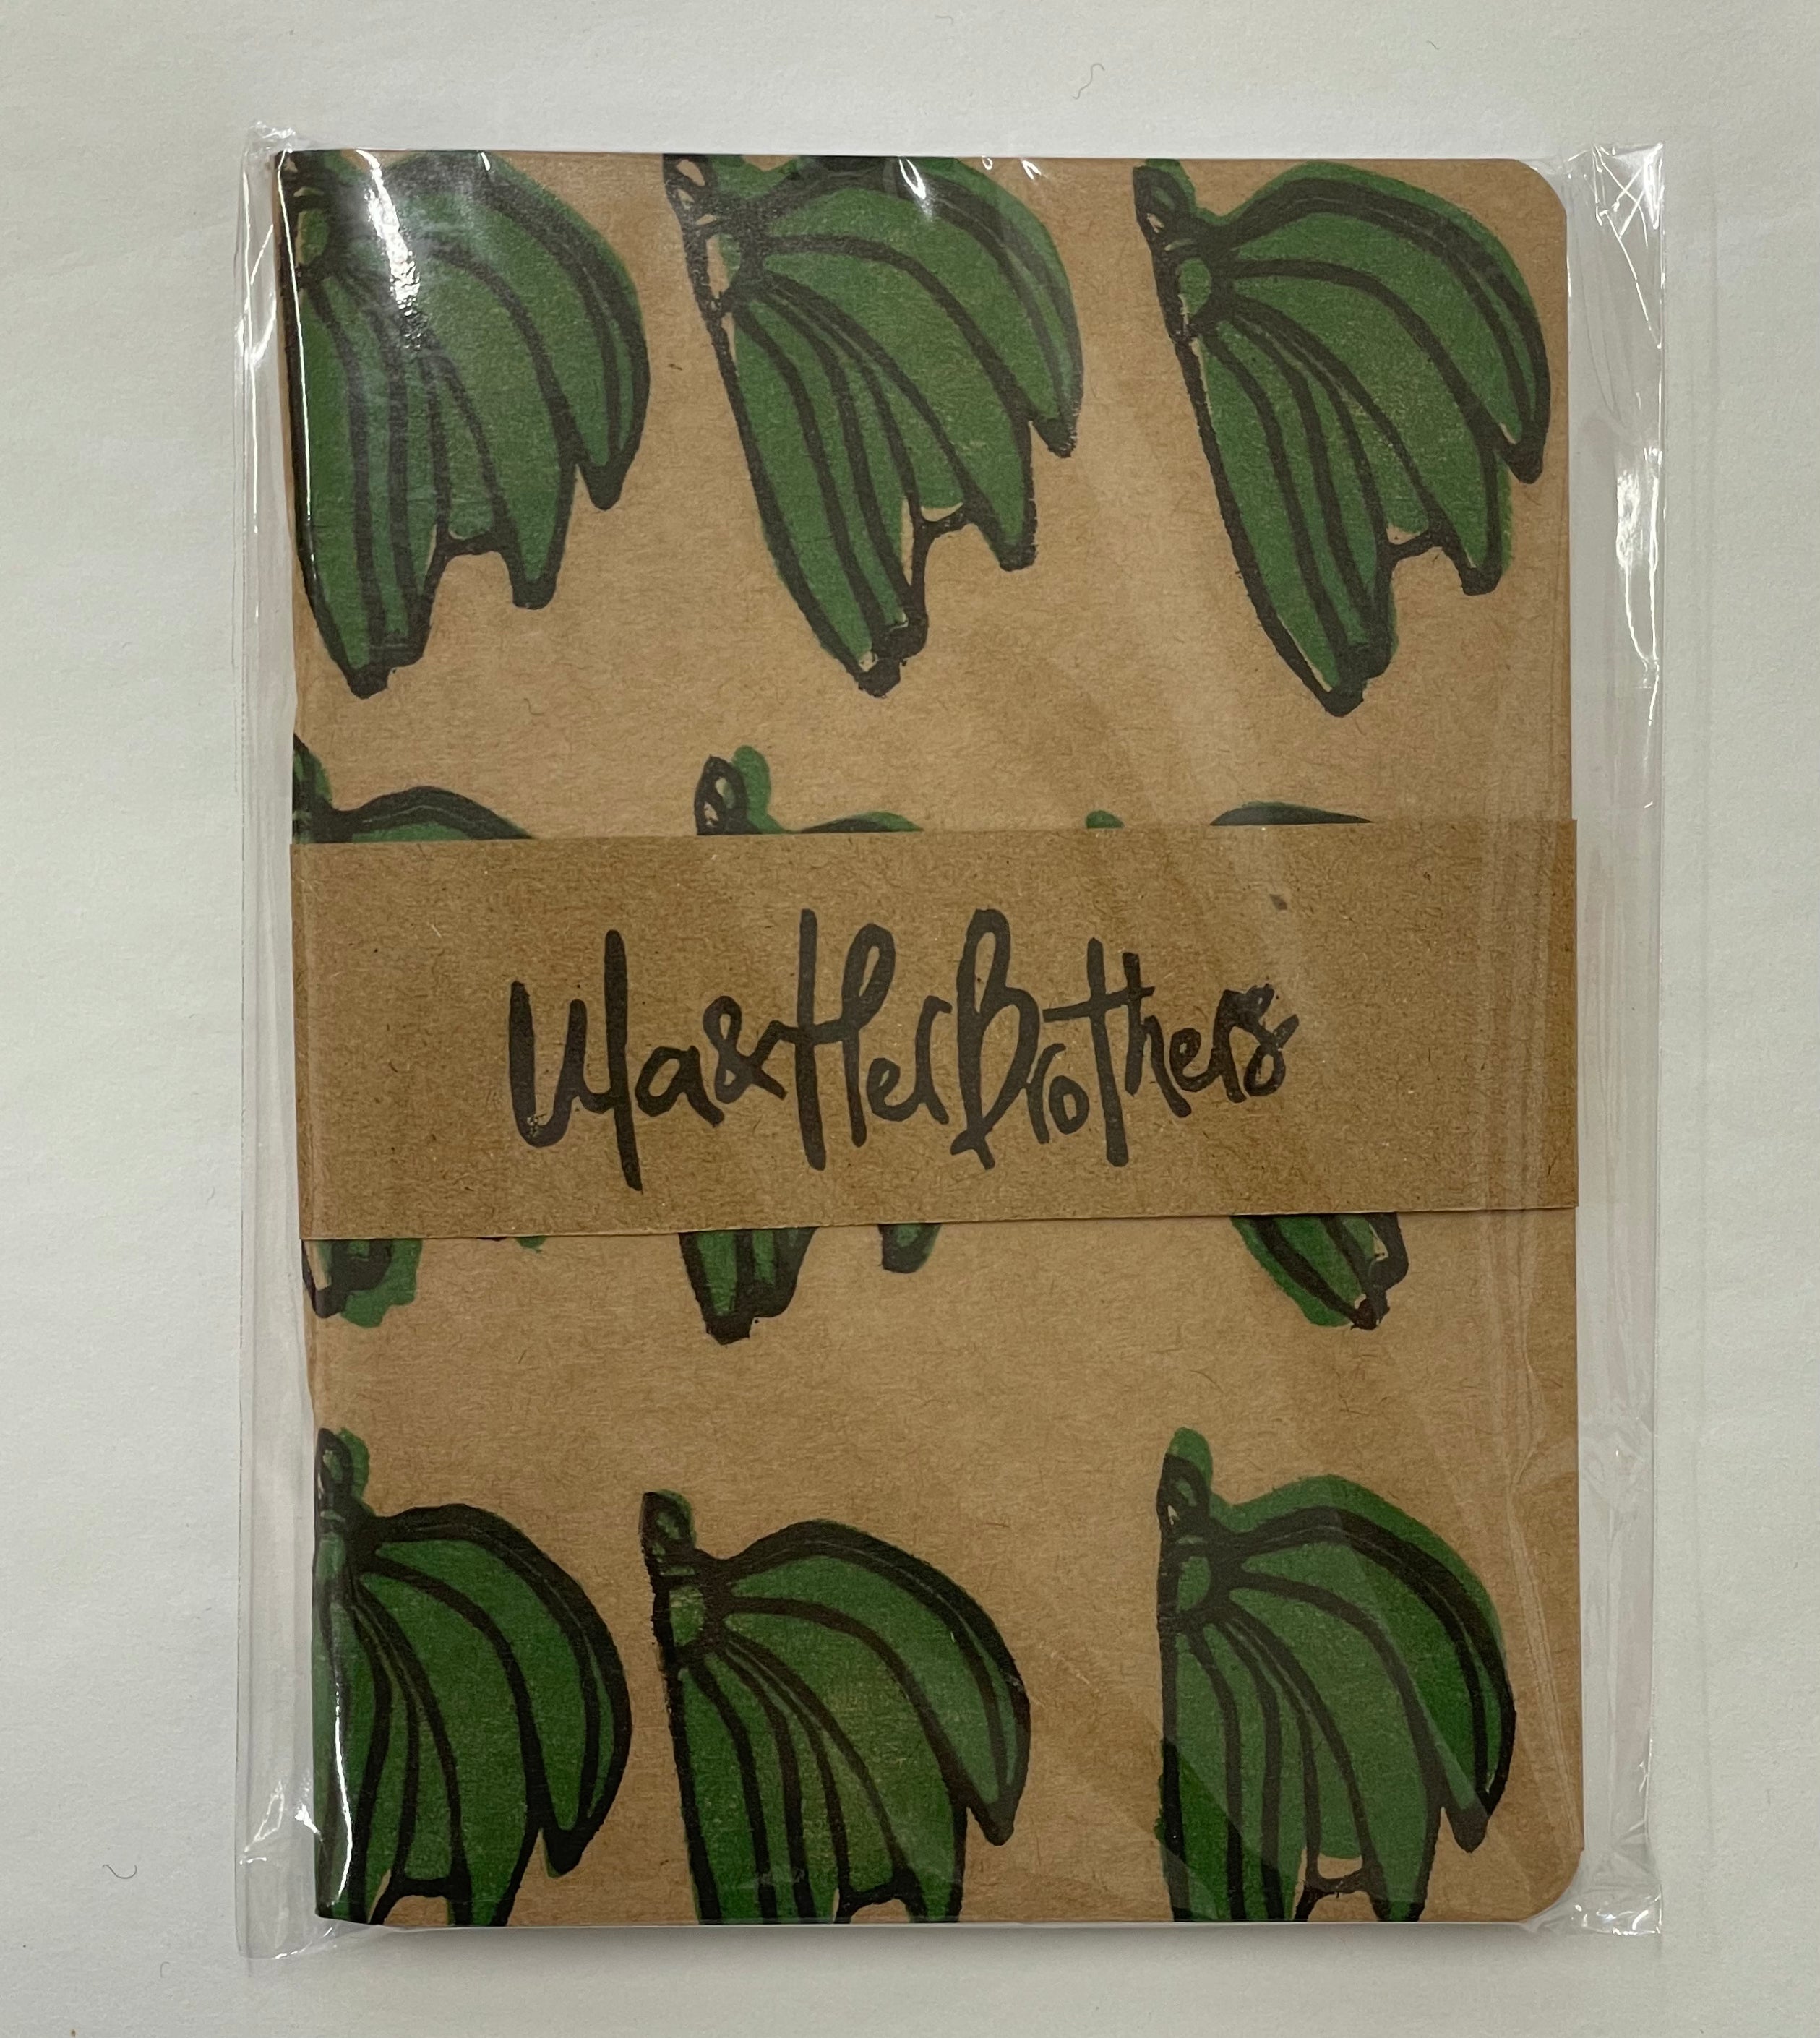 Green Bananas A6 Handmade & Handprinted Unlined Notebook by Ula&HerBrothers